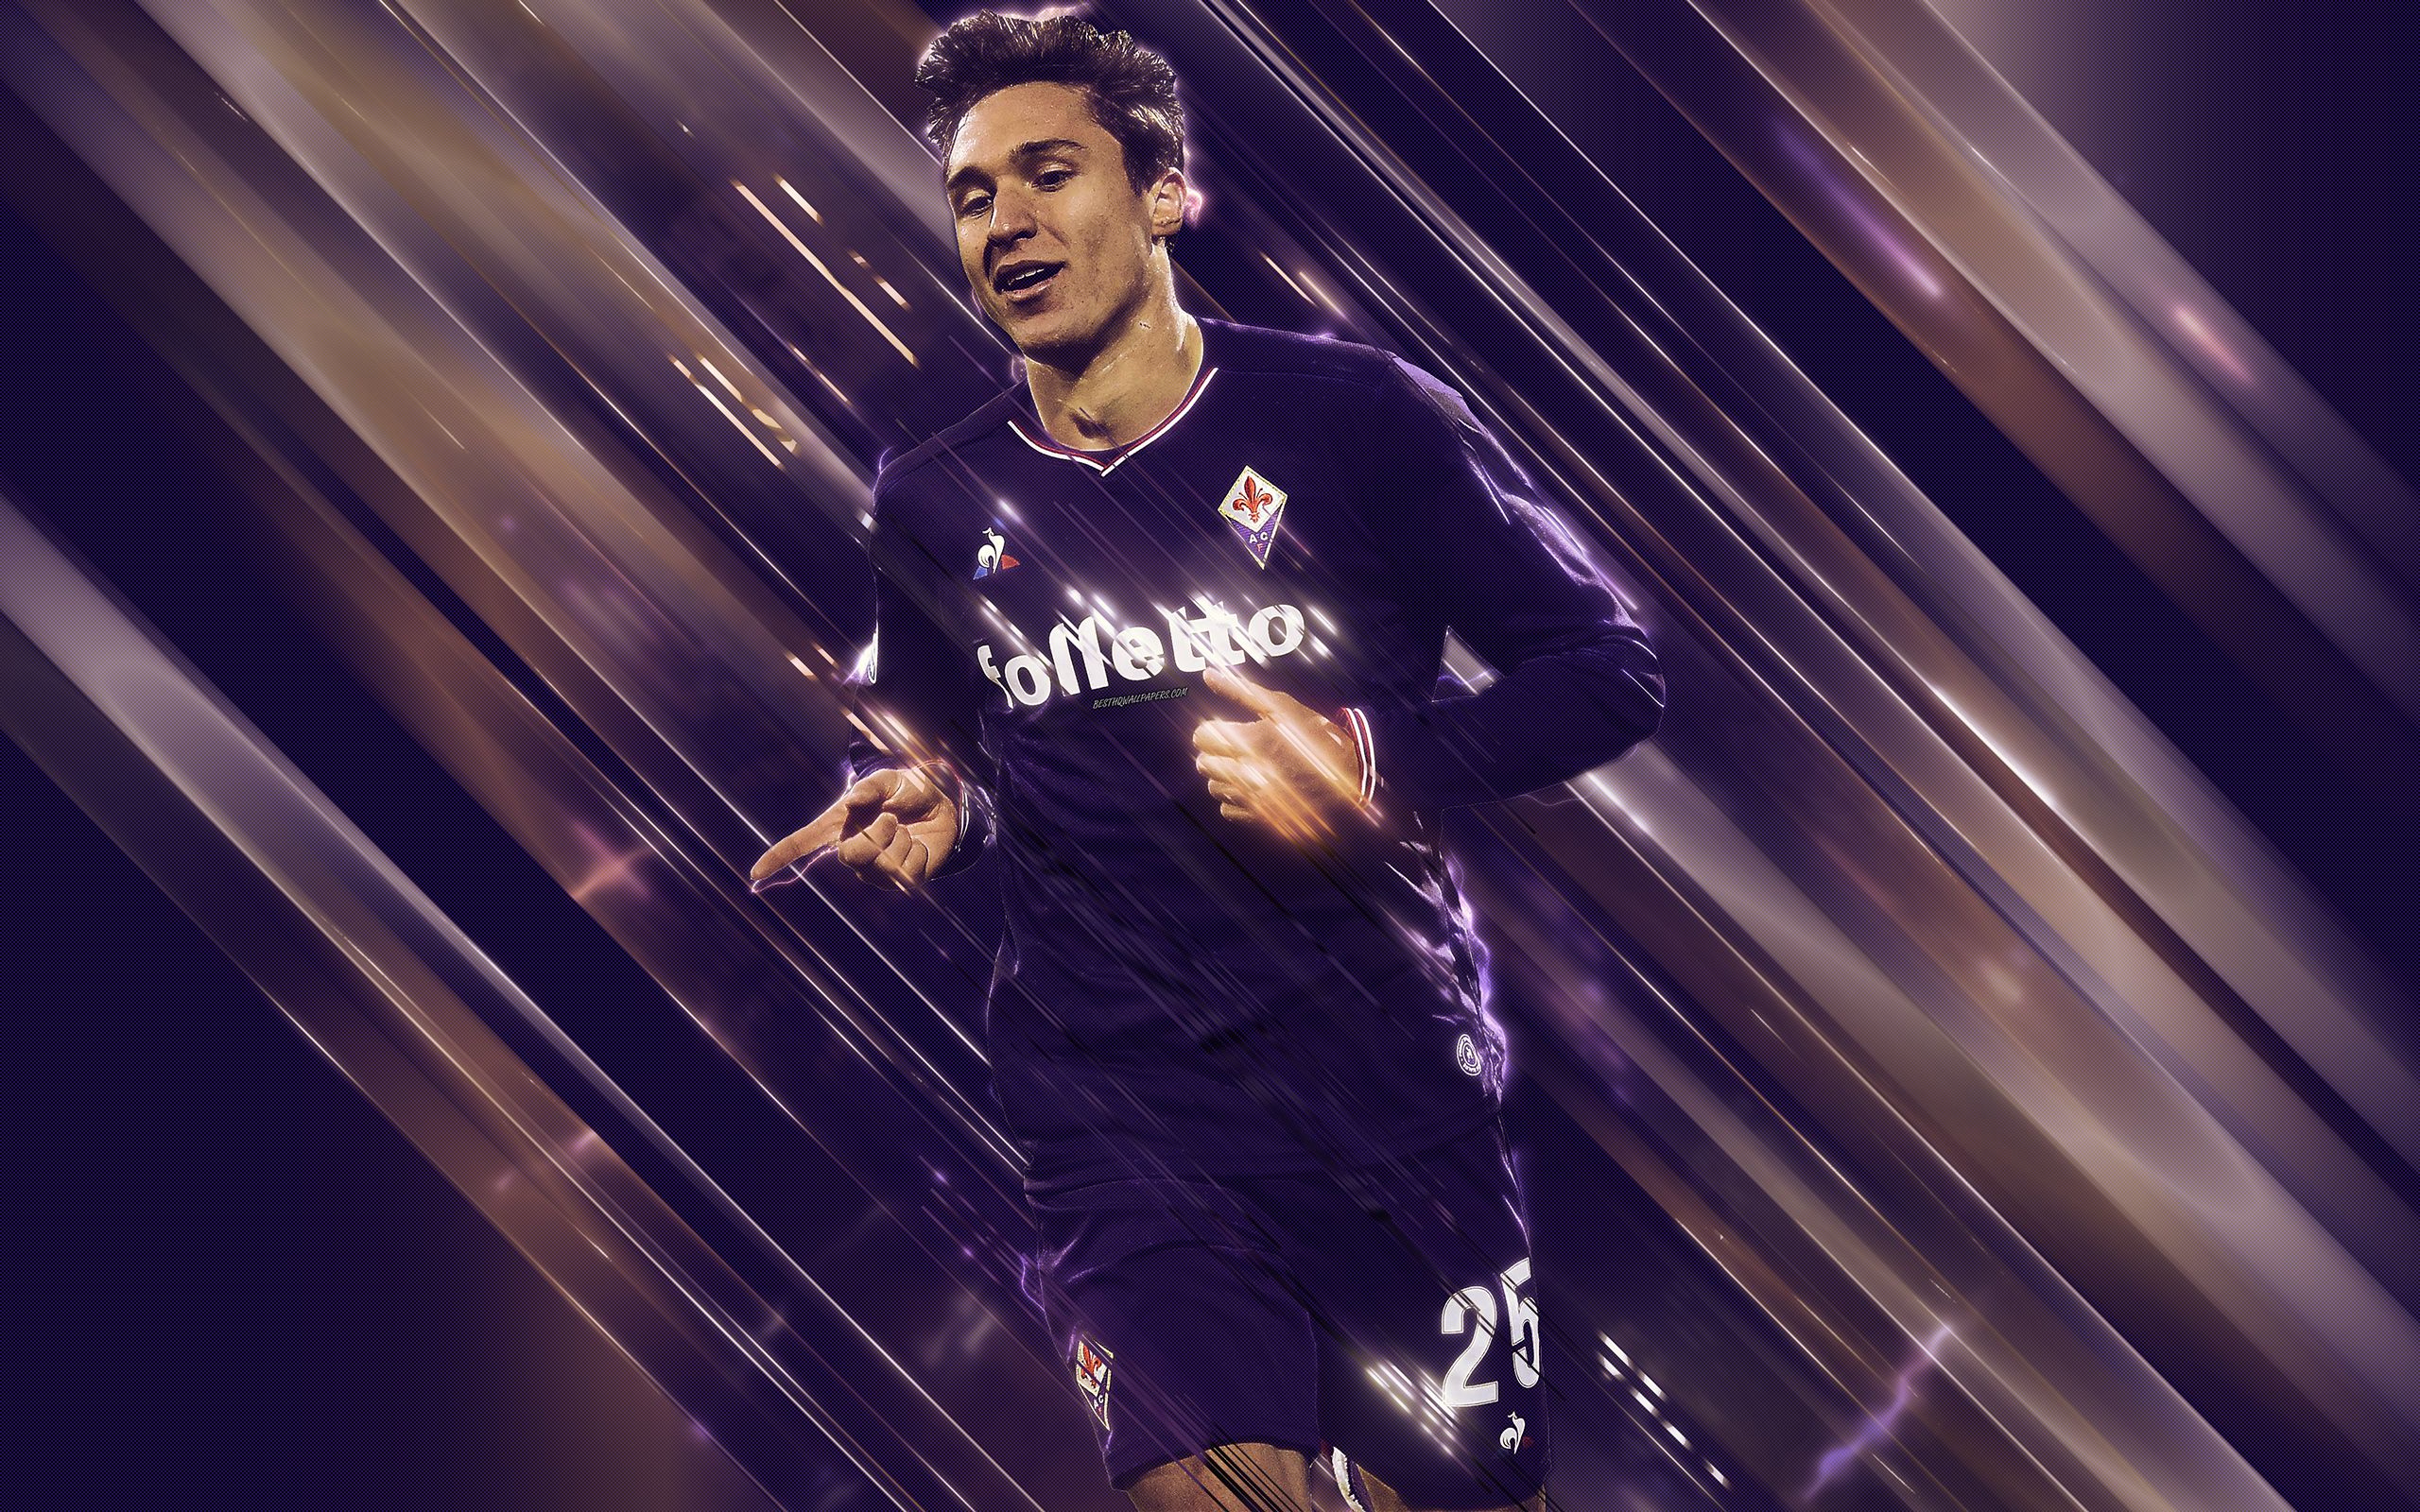 Download wallpaper Federico Chiesa, 4k, creative art, blades style, Italian football player, Fiorentina, Serie A, Italy, purple creative background, football for desktop with resolution 2560x1600. High Quality HD picture wallpaper